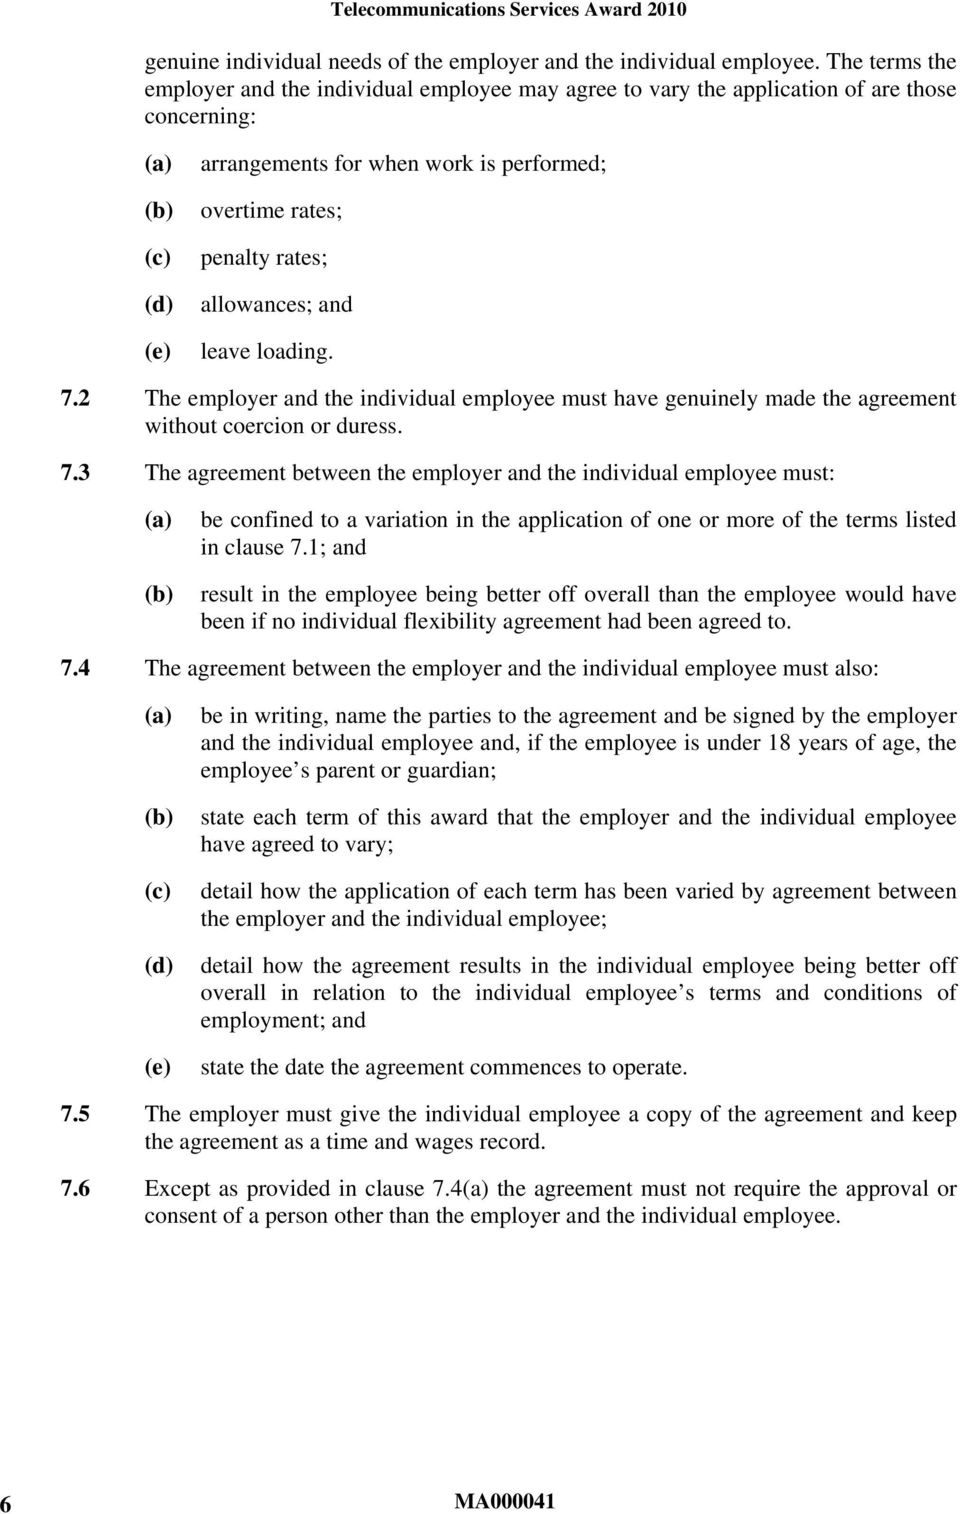 allowances; and leave loading. 7.2 The employer and the individual employee must have genuinely made the agreement without coercion or duress. 7.3 The agreement between the employer and the individual employee must: be confined to a variation in the application of one or more of the terms listed in clause 7.